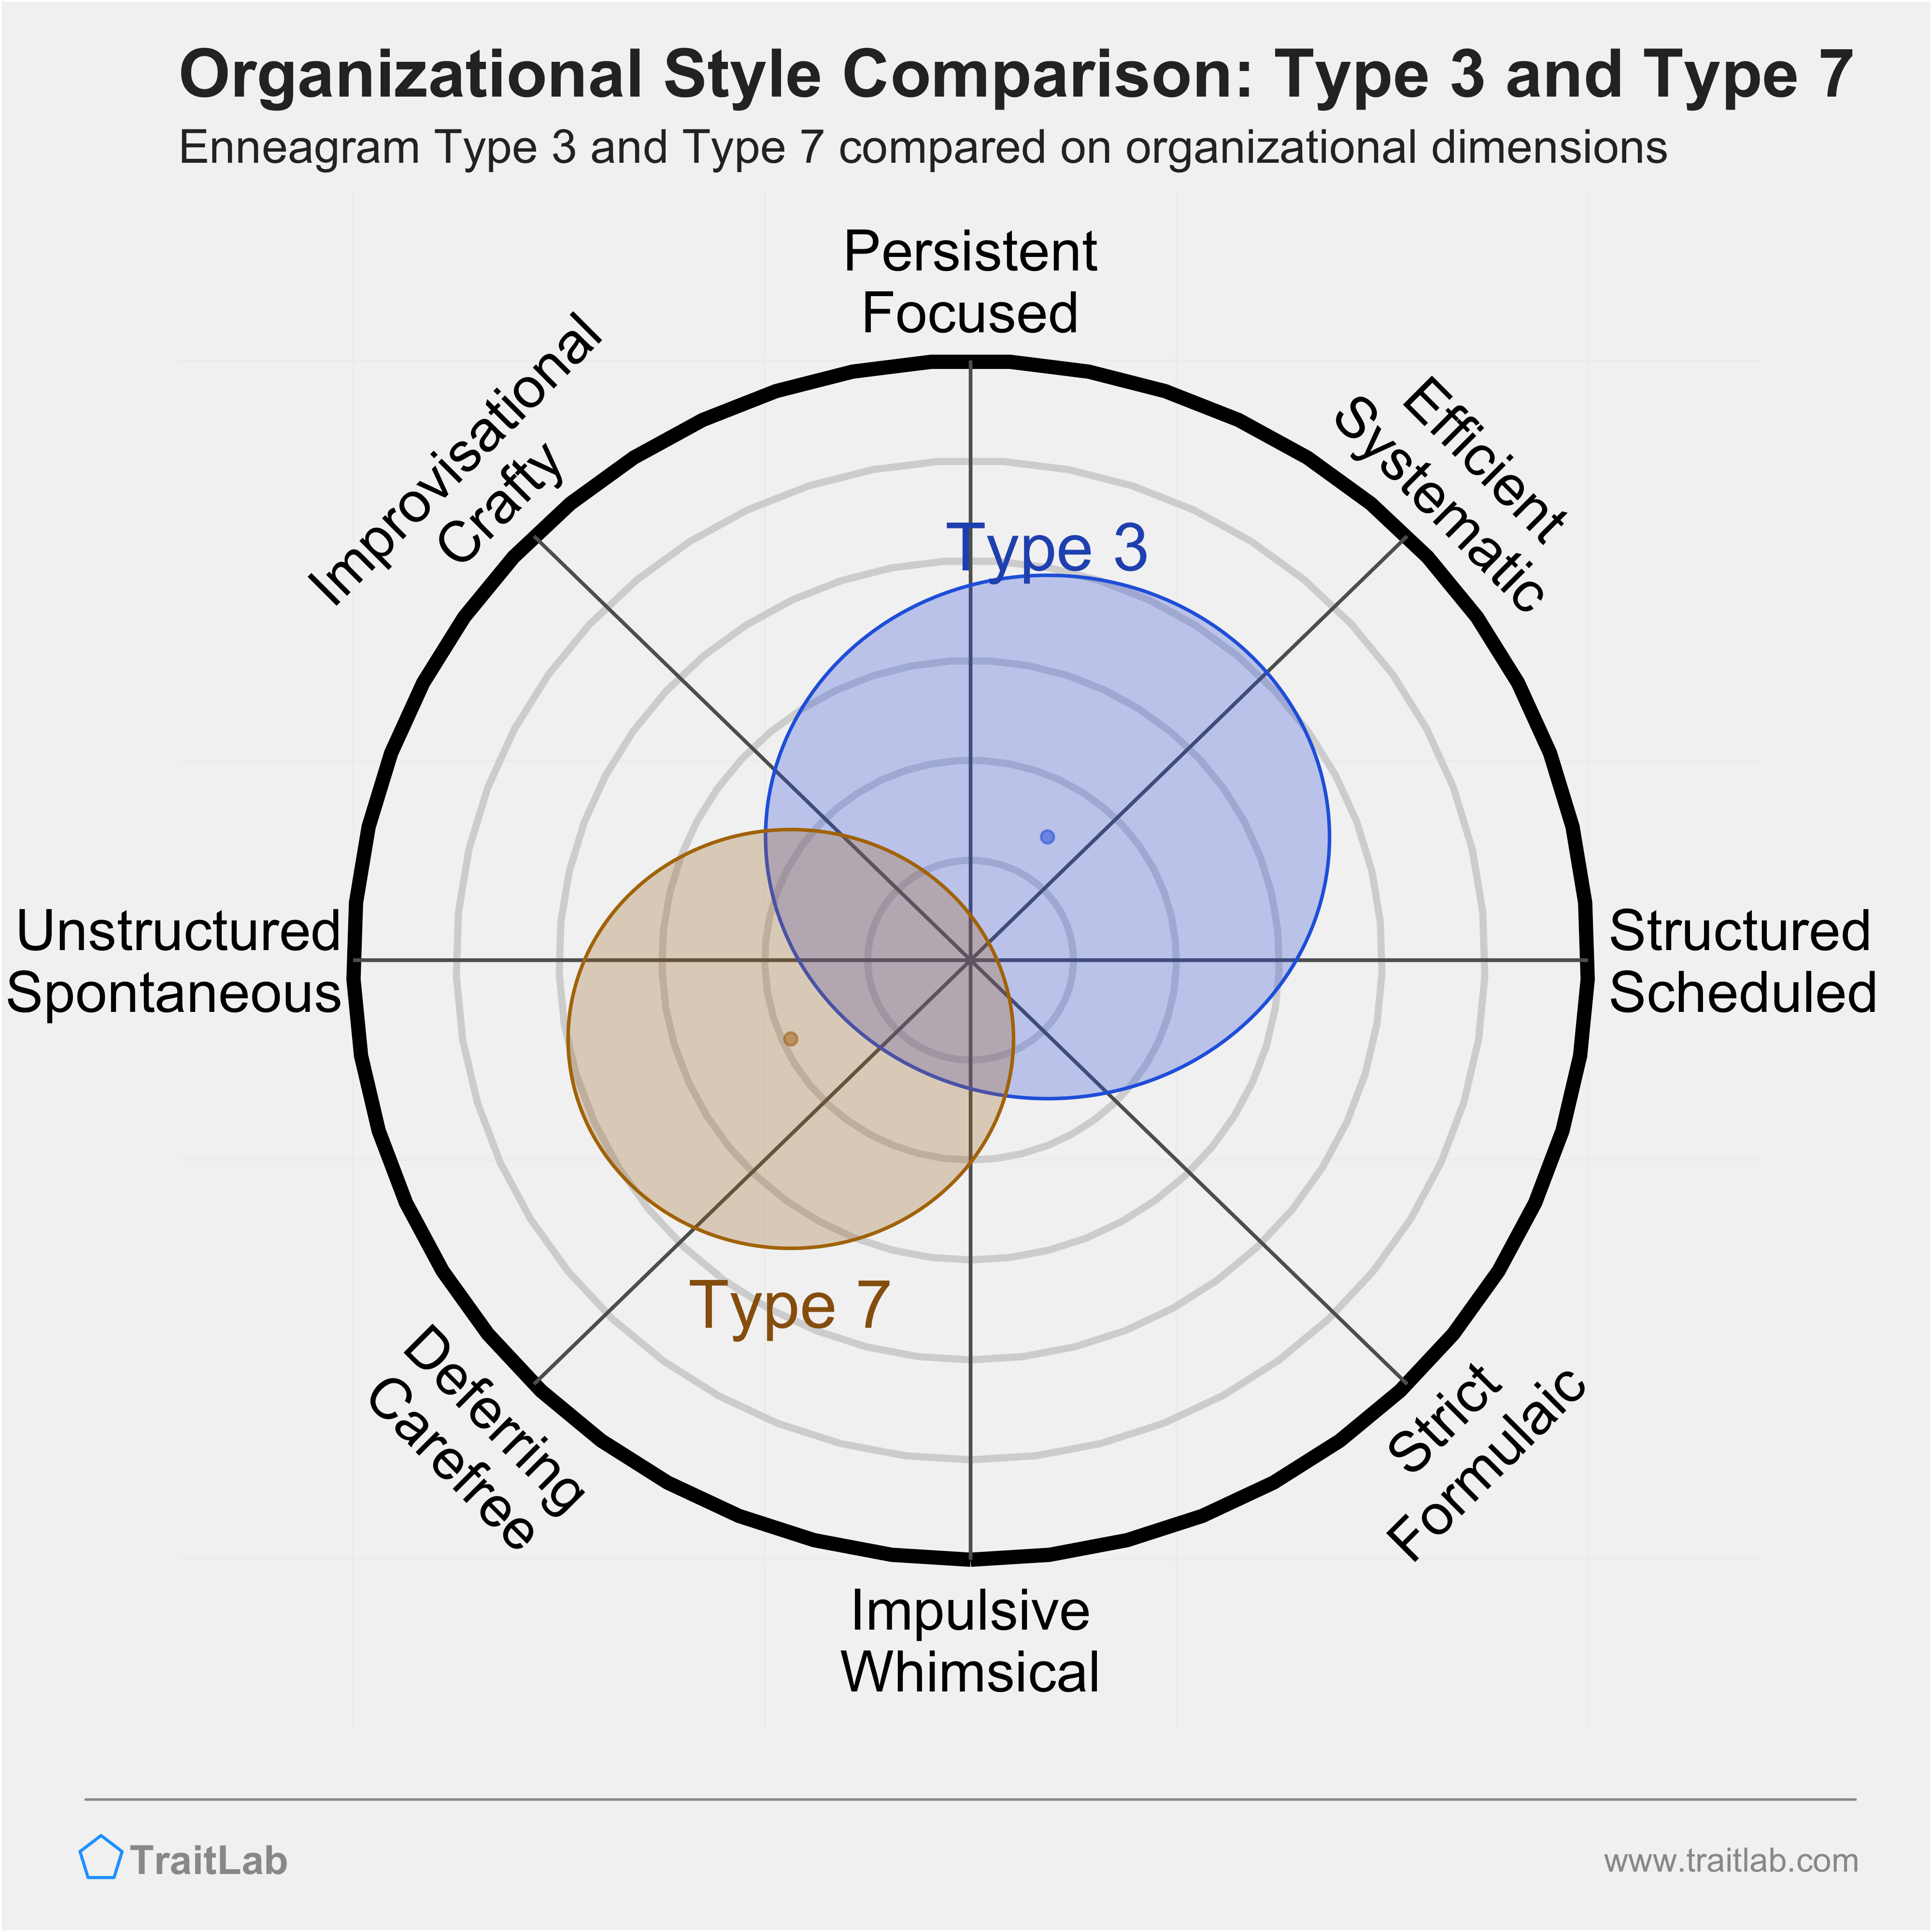 Type 3 and Type 7 comparison across organizational dimensions